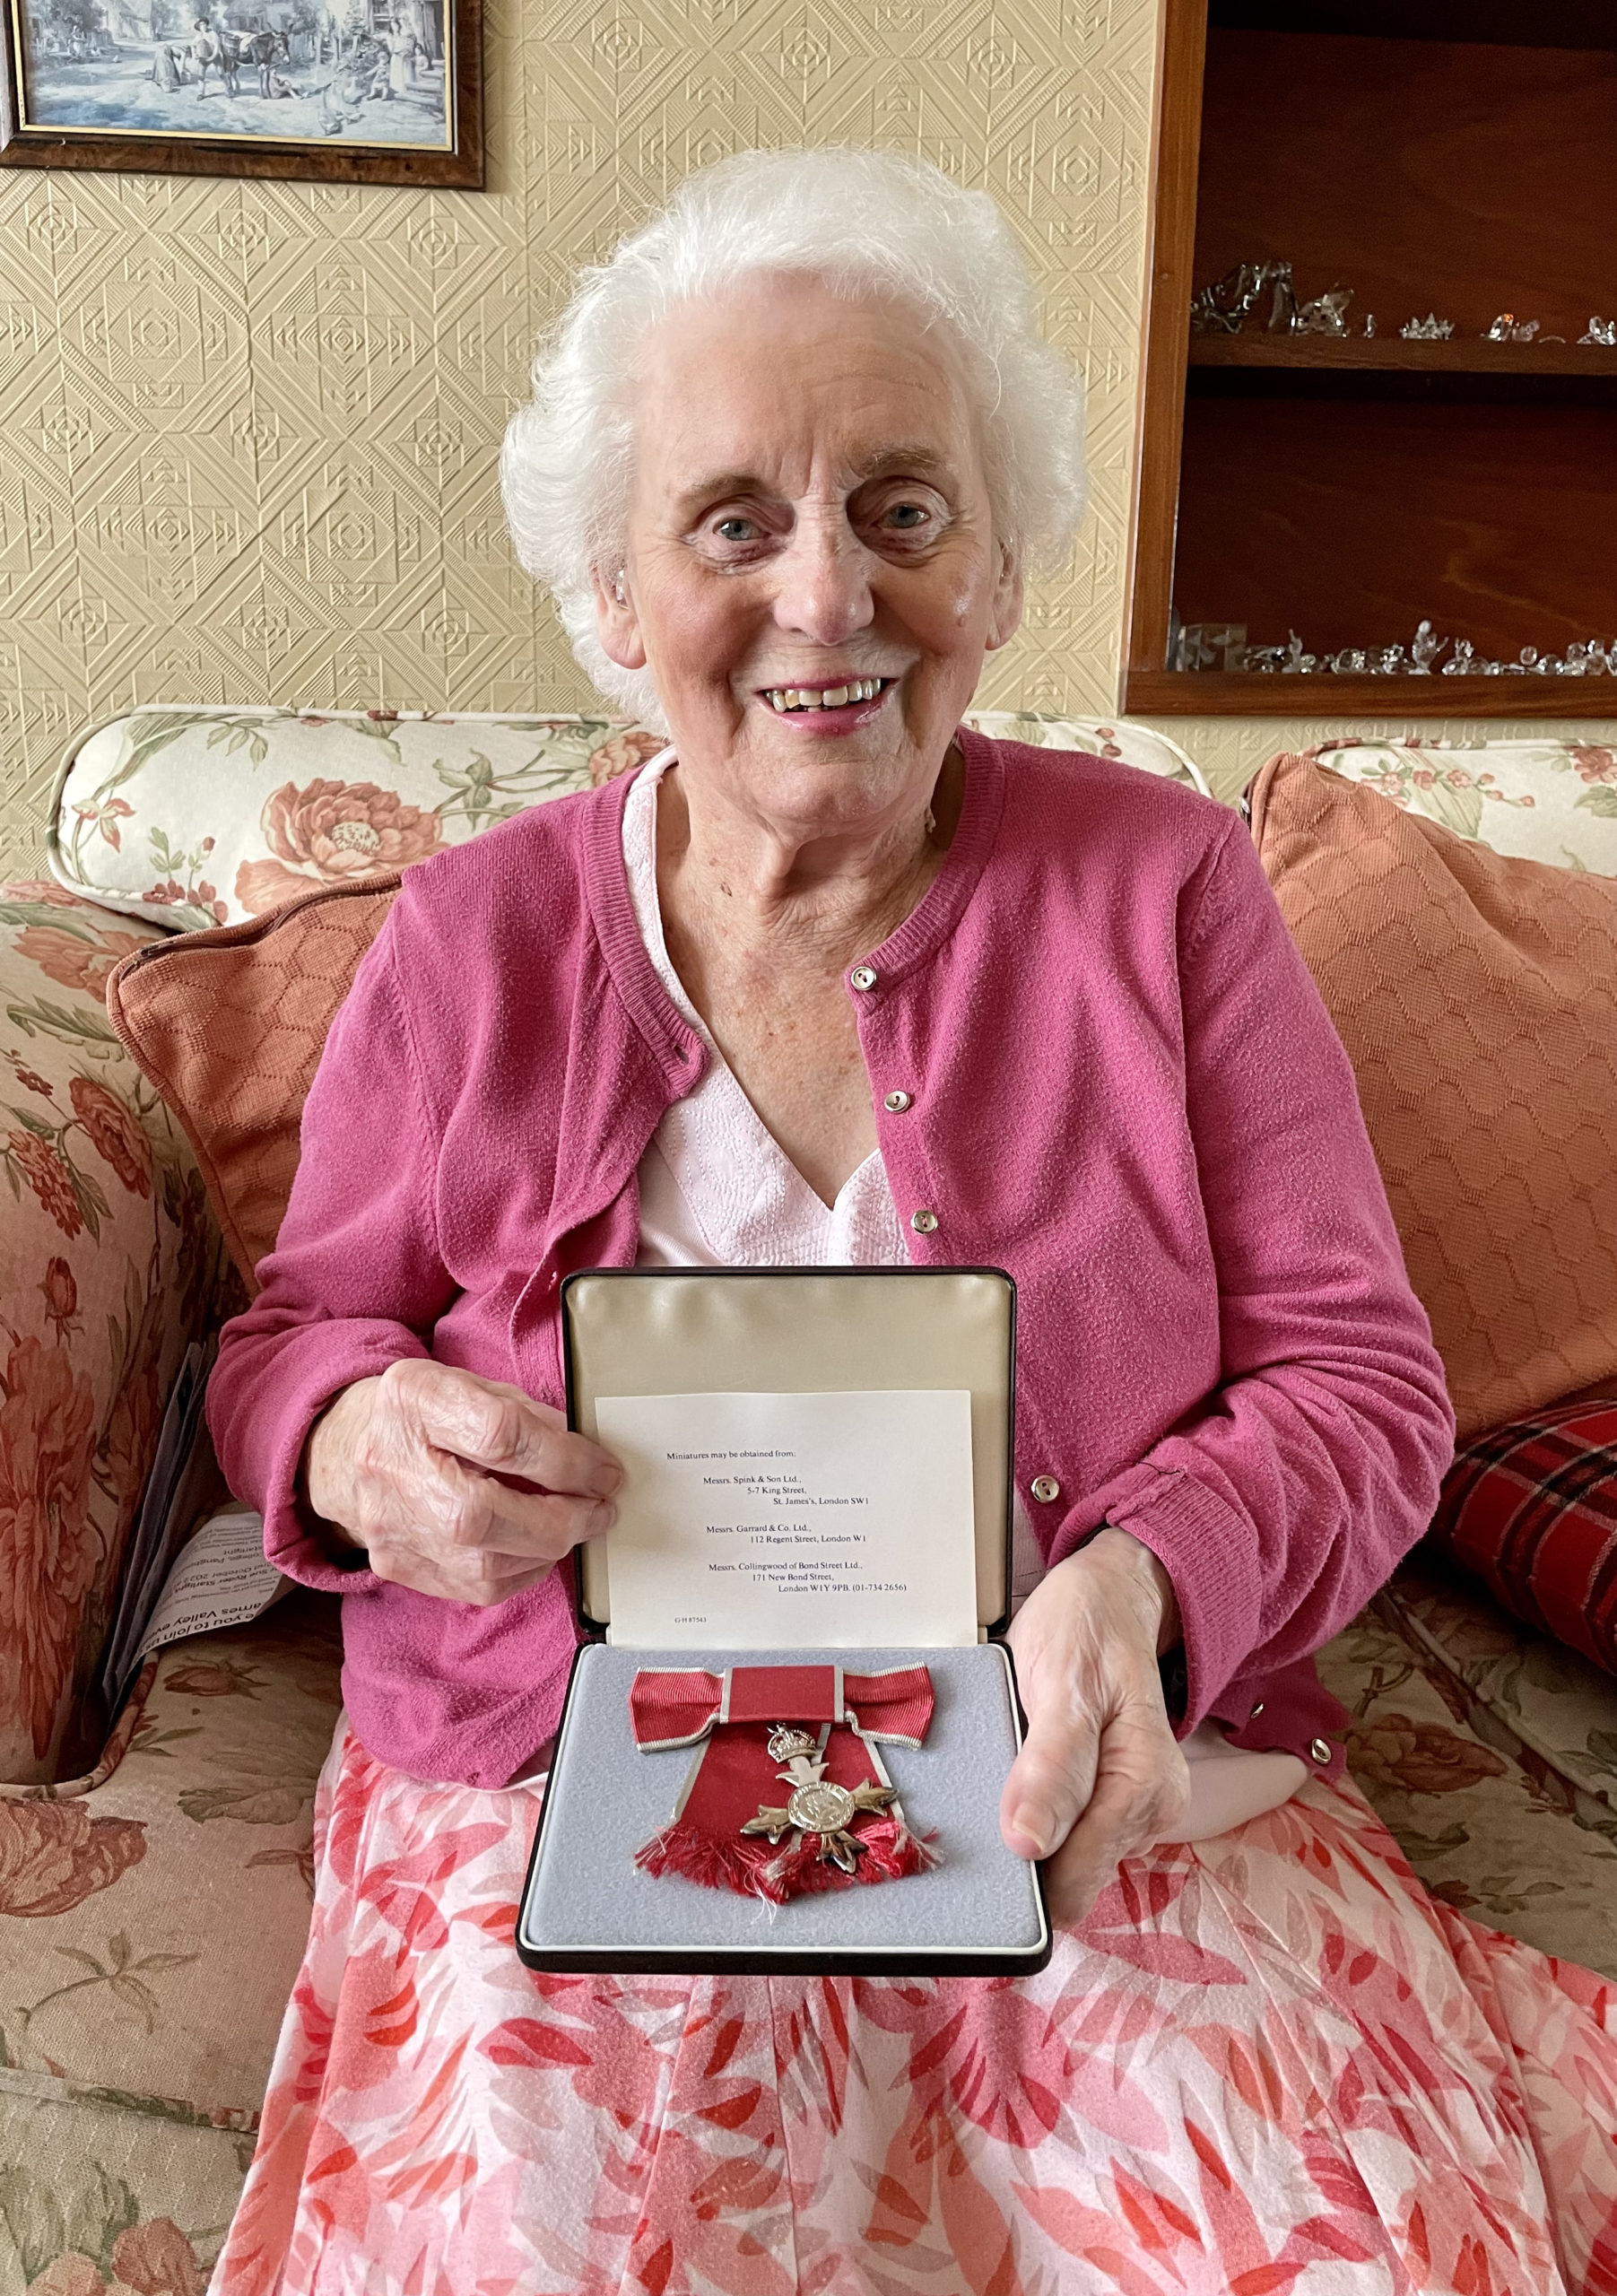 Carers Pay Tribute to The Queen